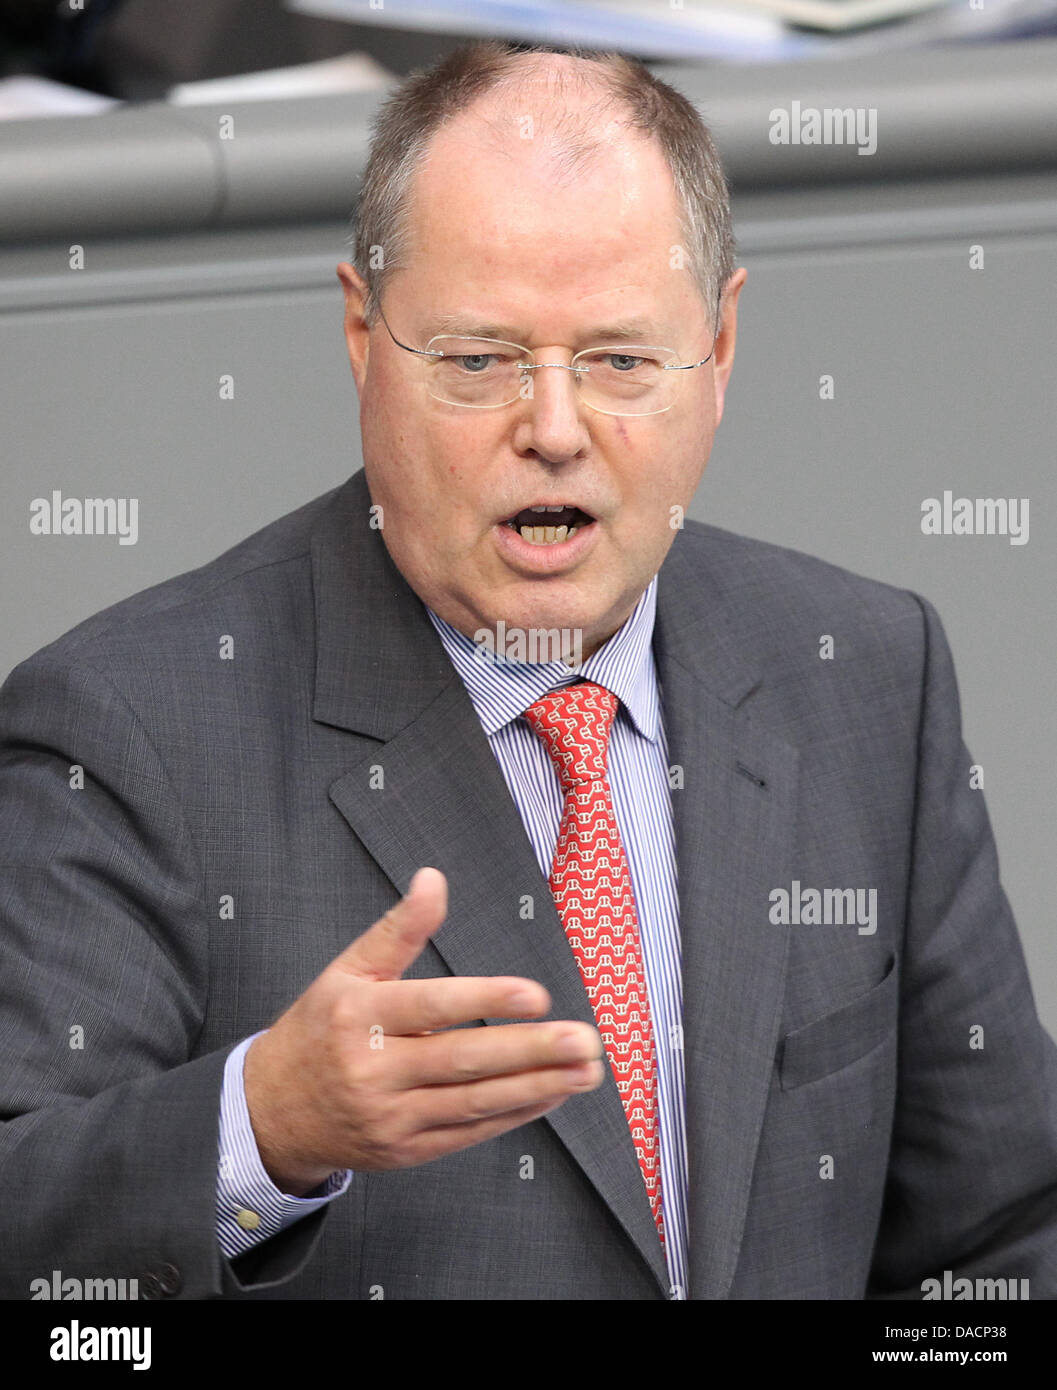 Peer Steinbrueck (SPD) speaks in the Bundestag, Berlin, Germany, 29 September 2011. The Bundestag will have a roll-call vote on the Euro rescue package today. Photo: Wolfgang Krumm Stock Photo